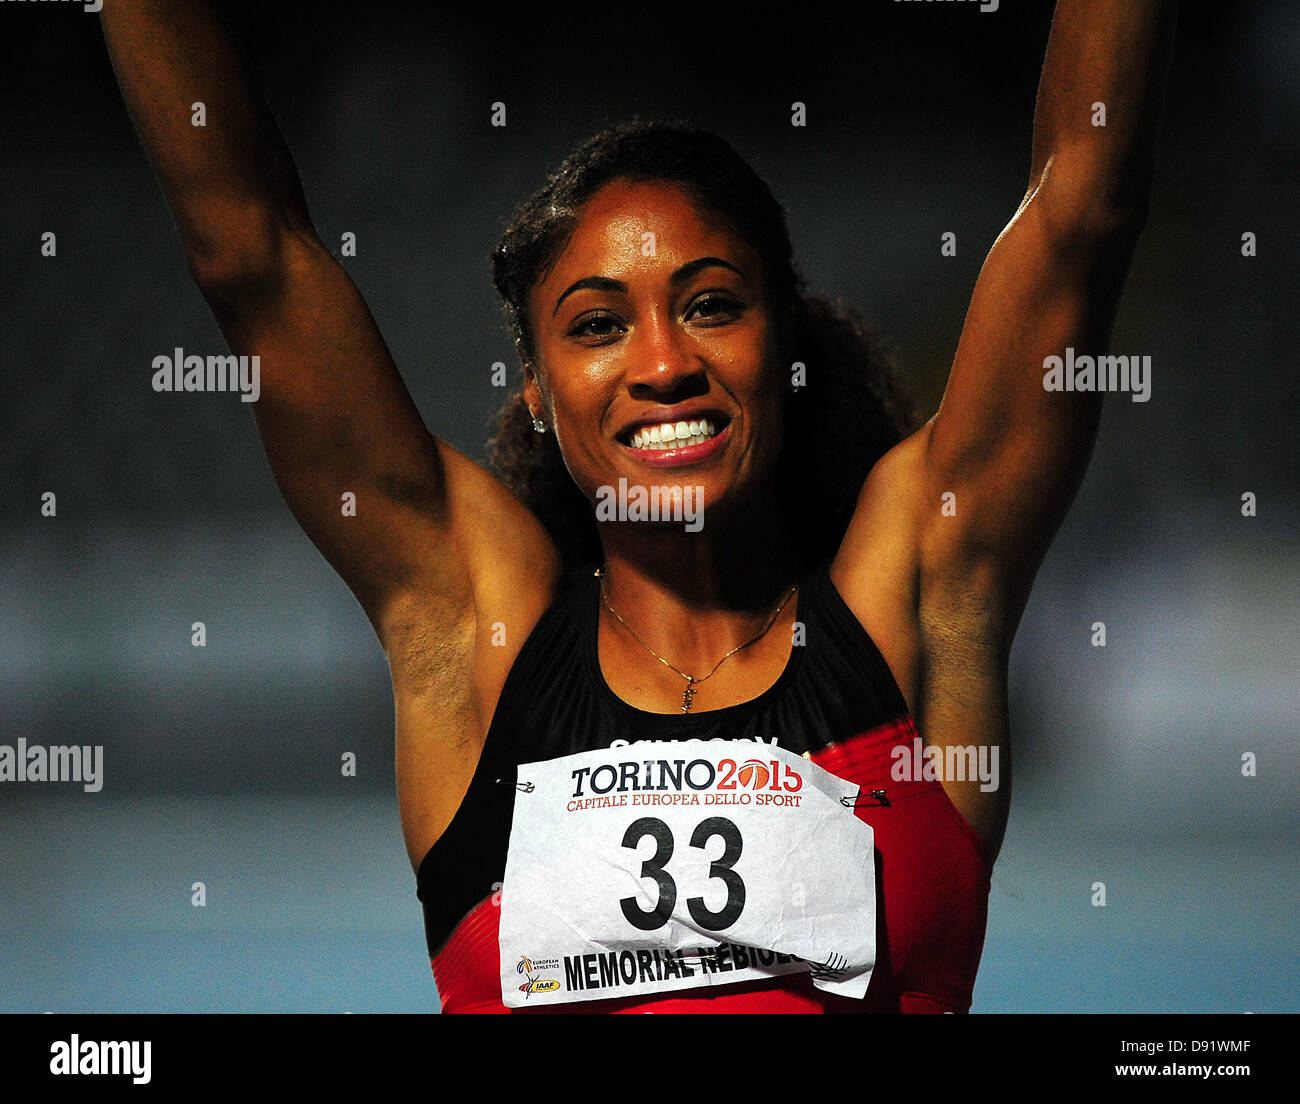 08.06.2013 Torino, Italy. Queen Harrison of the USA wins the Womens 100m hurdles during the International Athletics meeting Memorial Primo Nebiolo from the Stadio Primo Nebiolo. Stock Photo